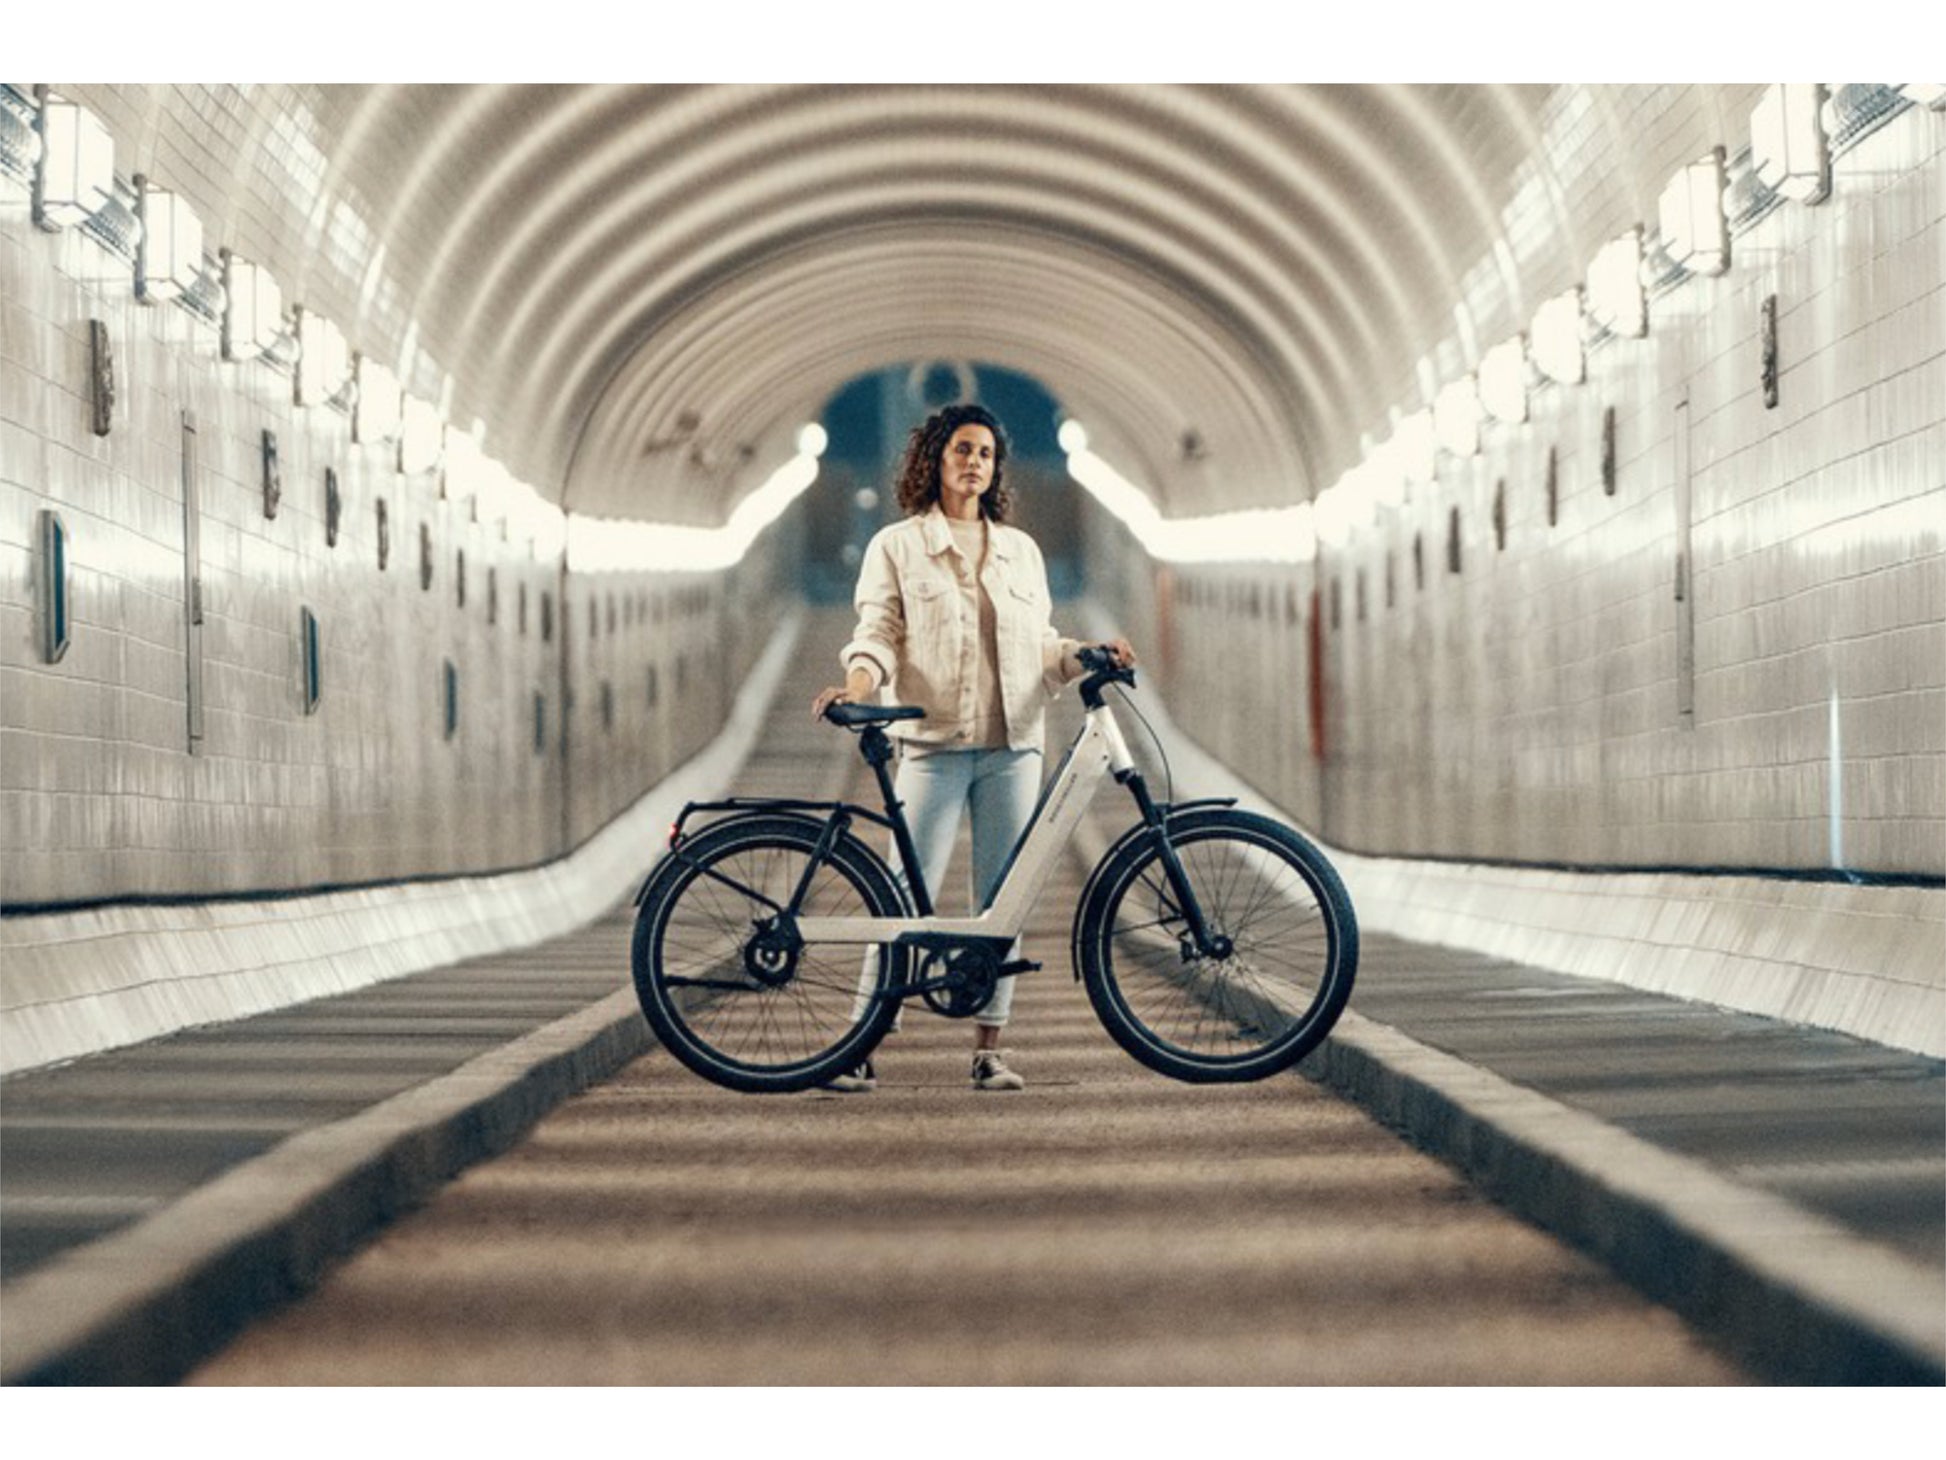 Riese and Muller Nevo GT Rohloff emtb hardtail woman in city tunnel bike path